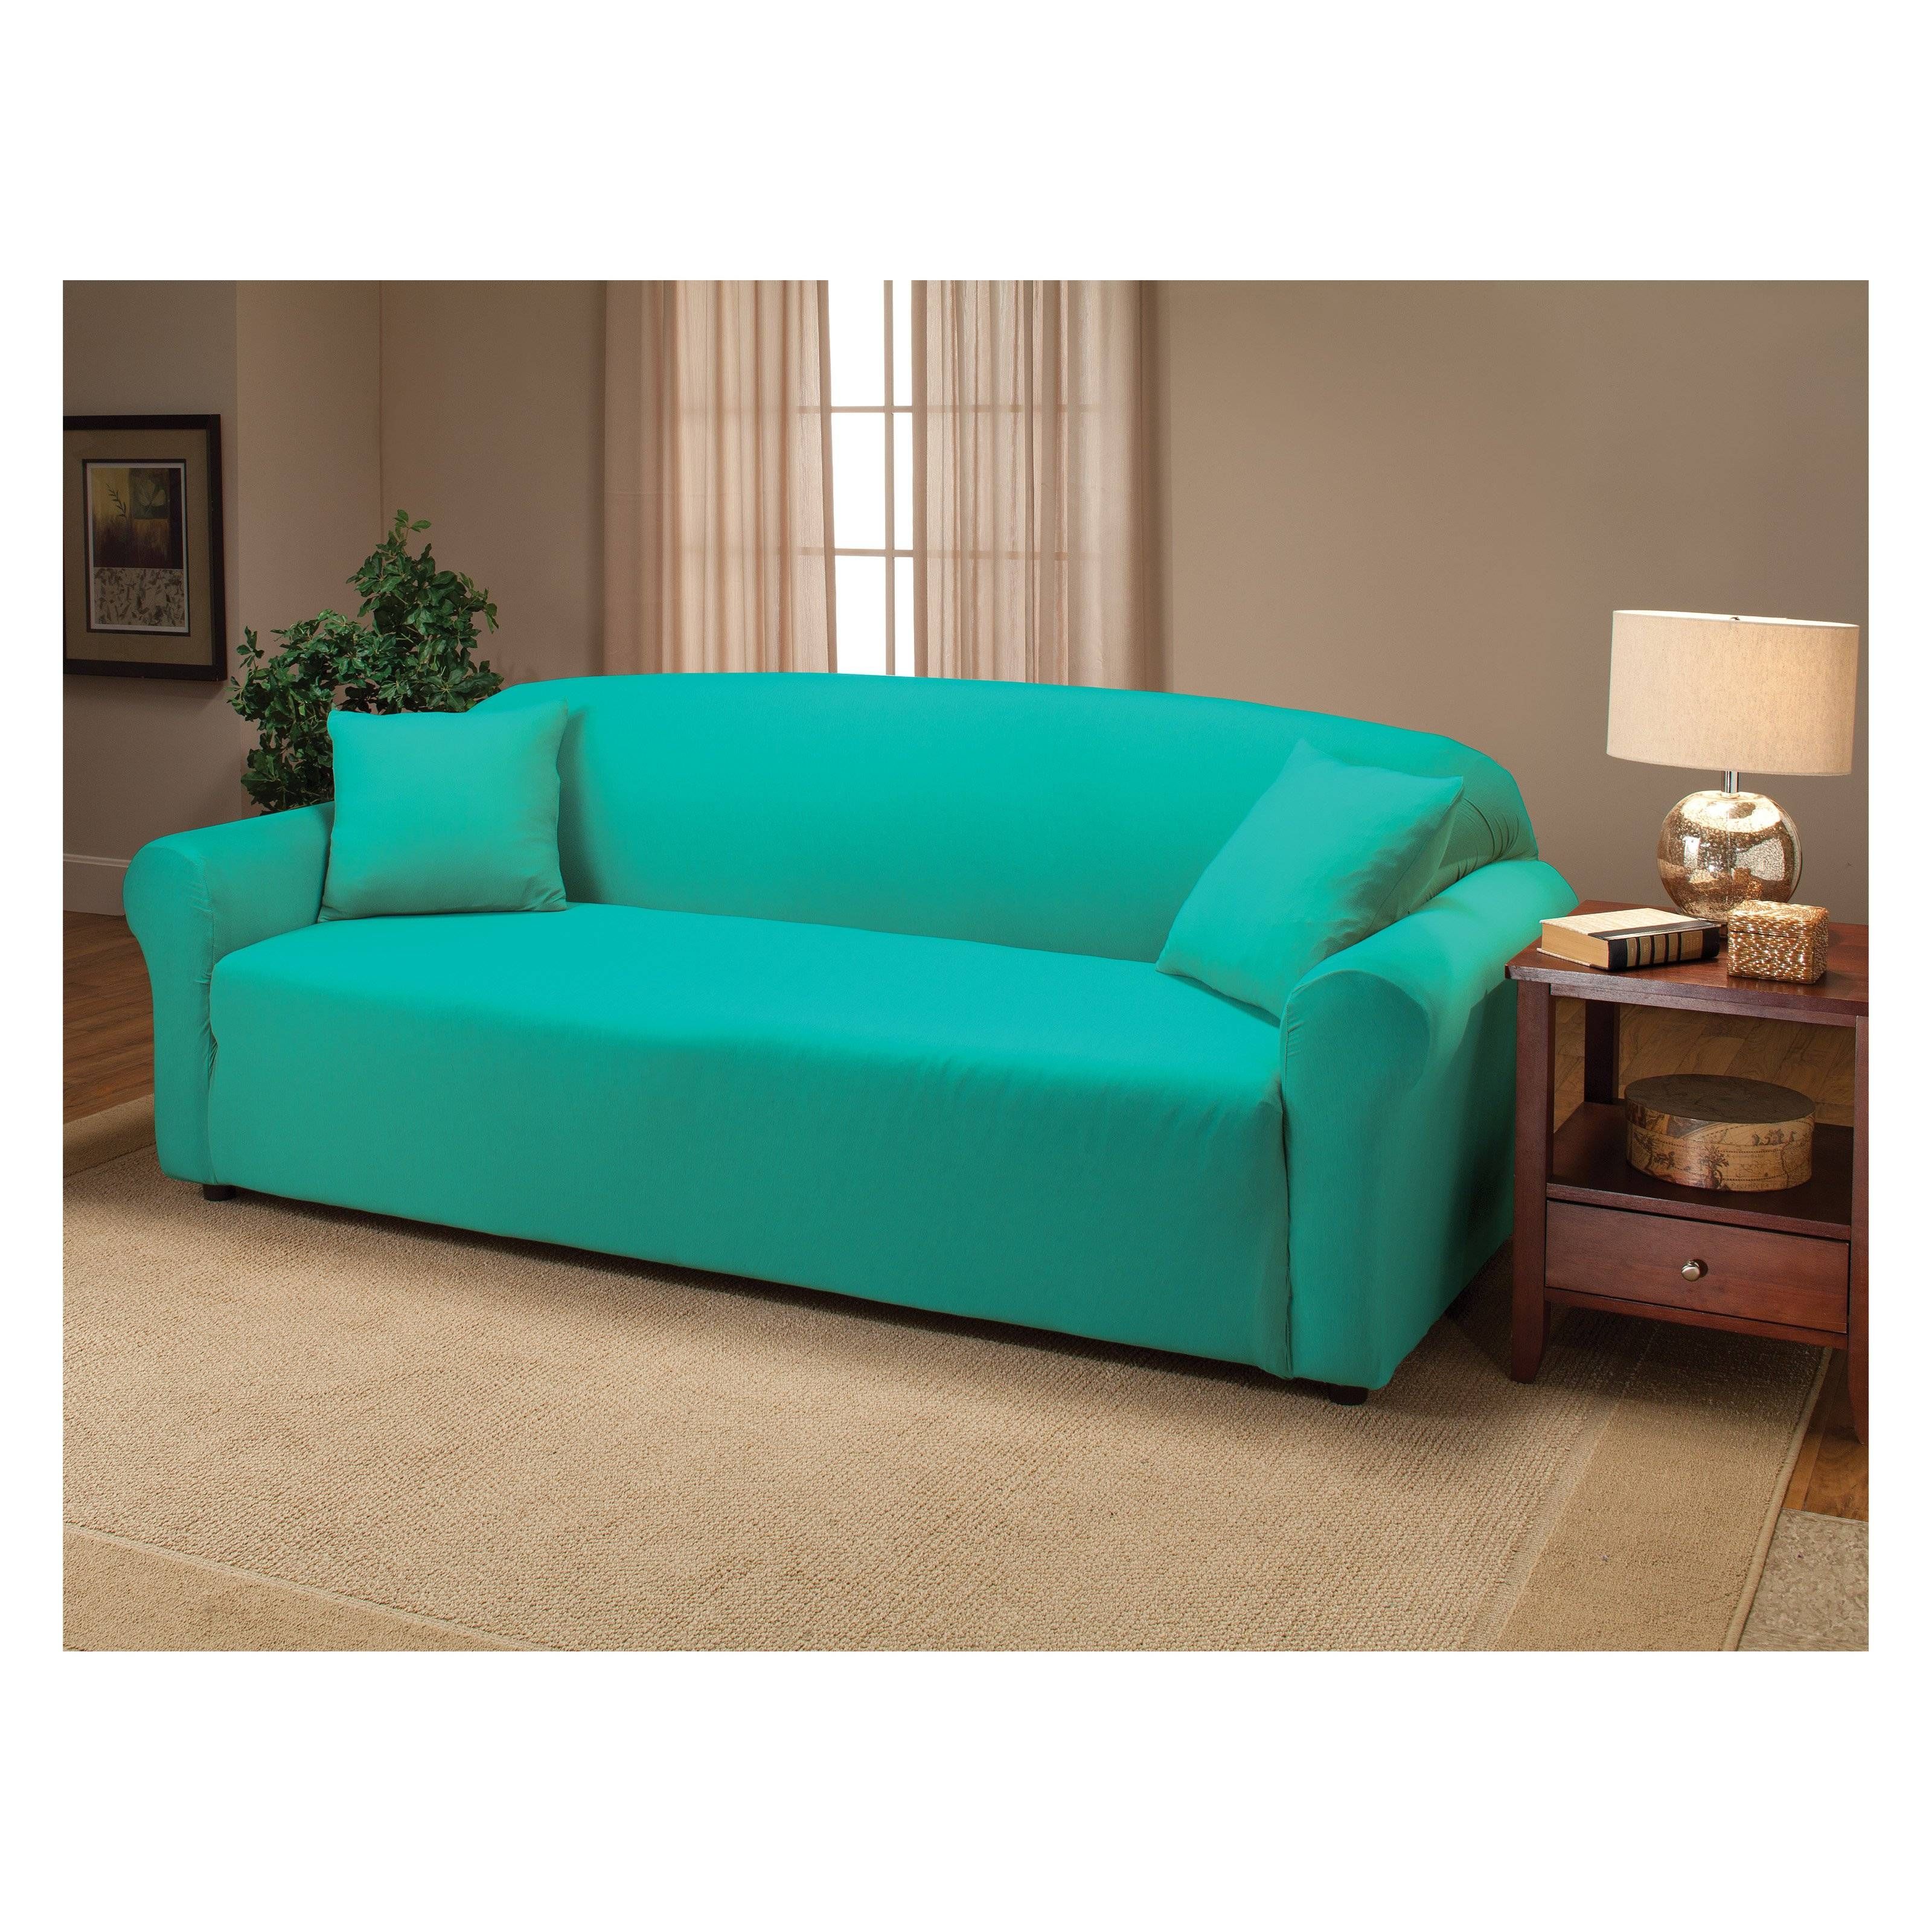 Maytex Stretch Pixel Two Piece Sofa Slipcover | Hayneedle Intended For Stretch Slipcover Sofas (View 10 of 15)